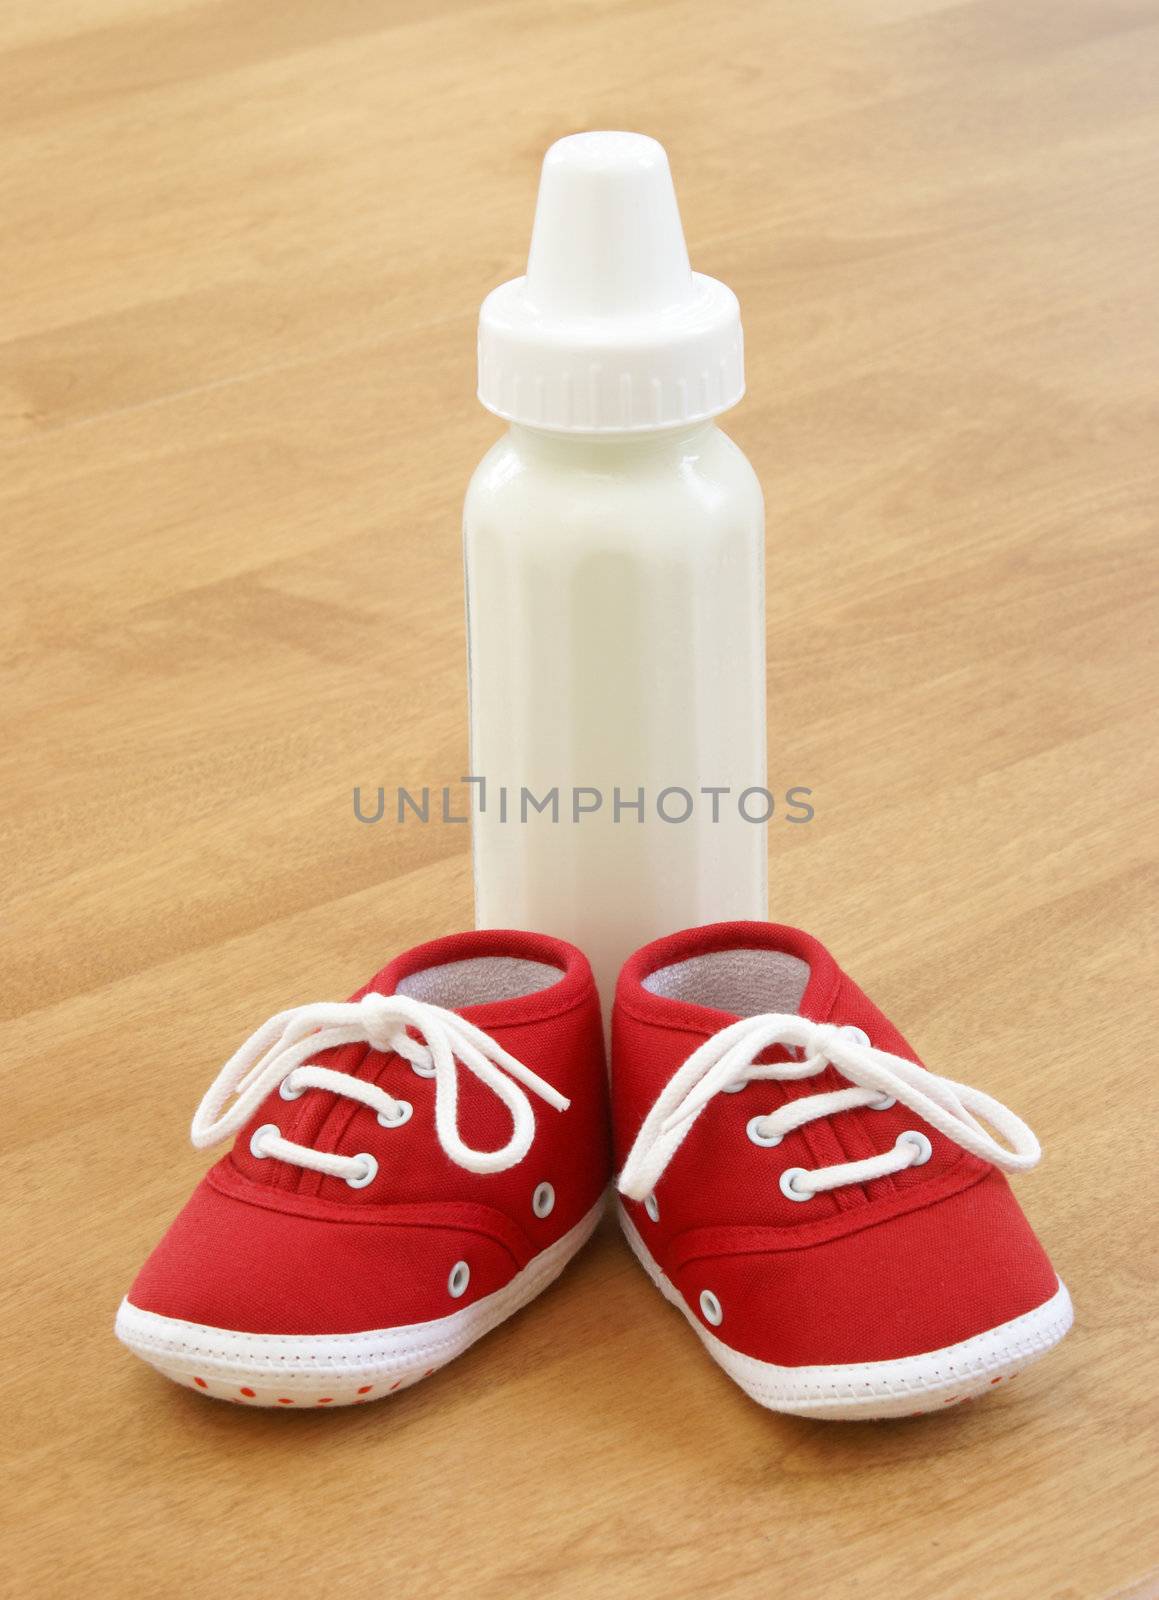 A baby bottle and a pair of shoes are sitting on a table.